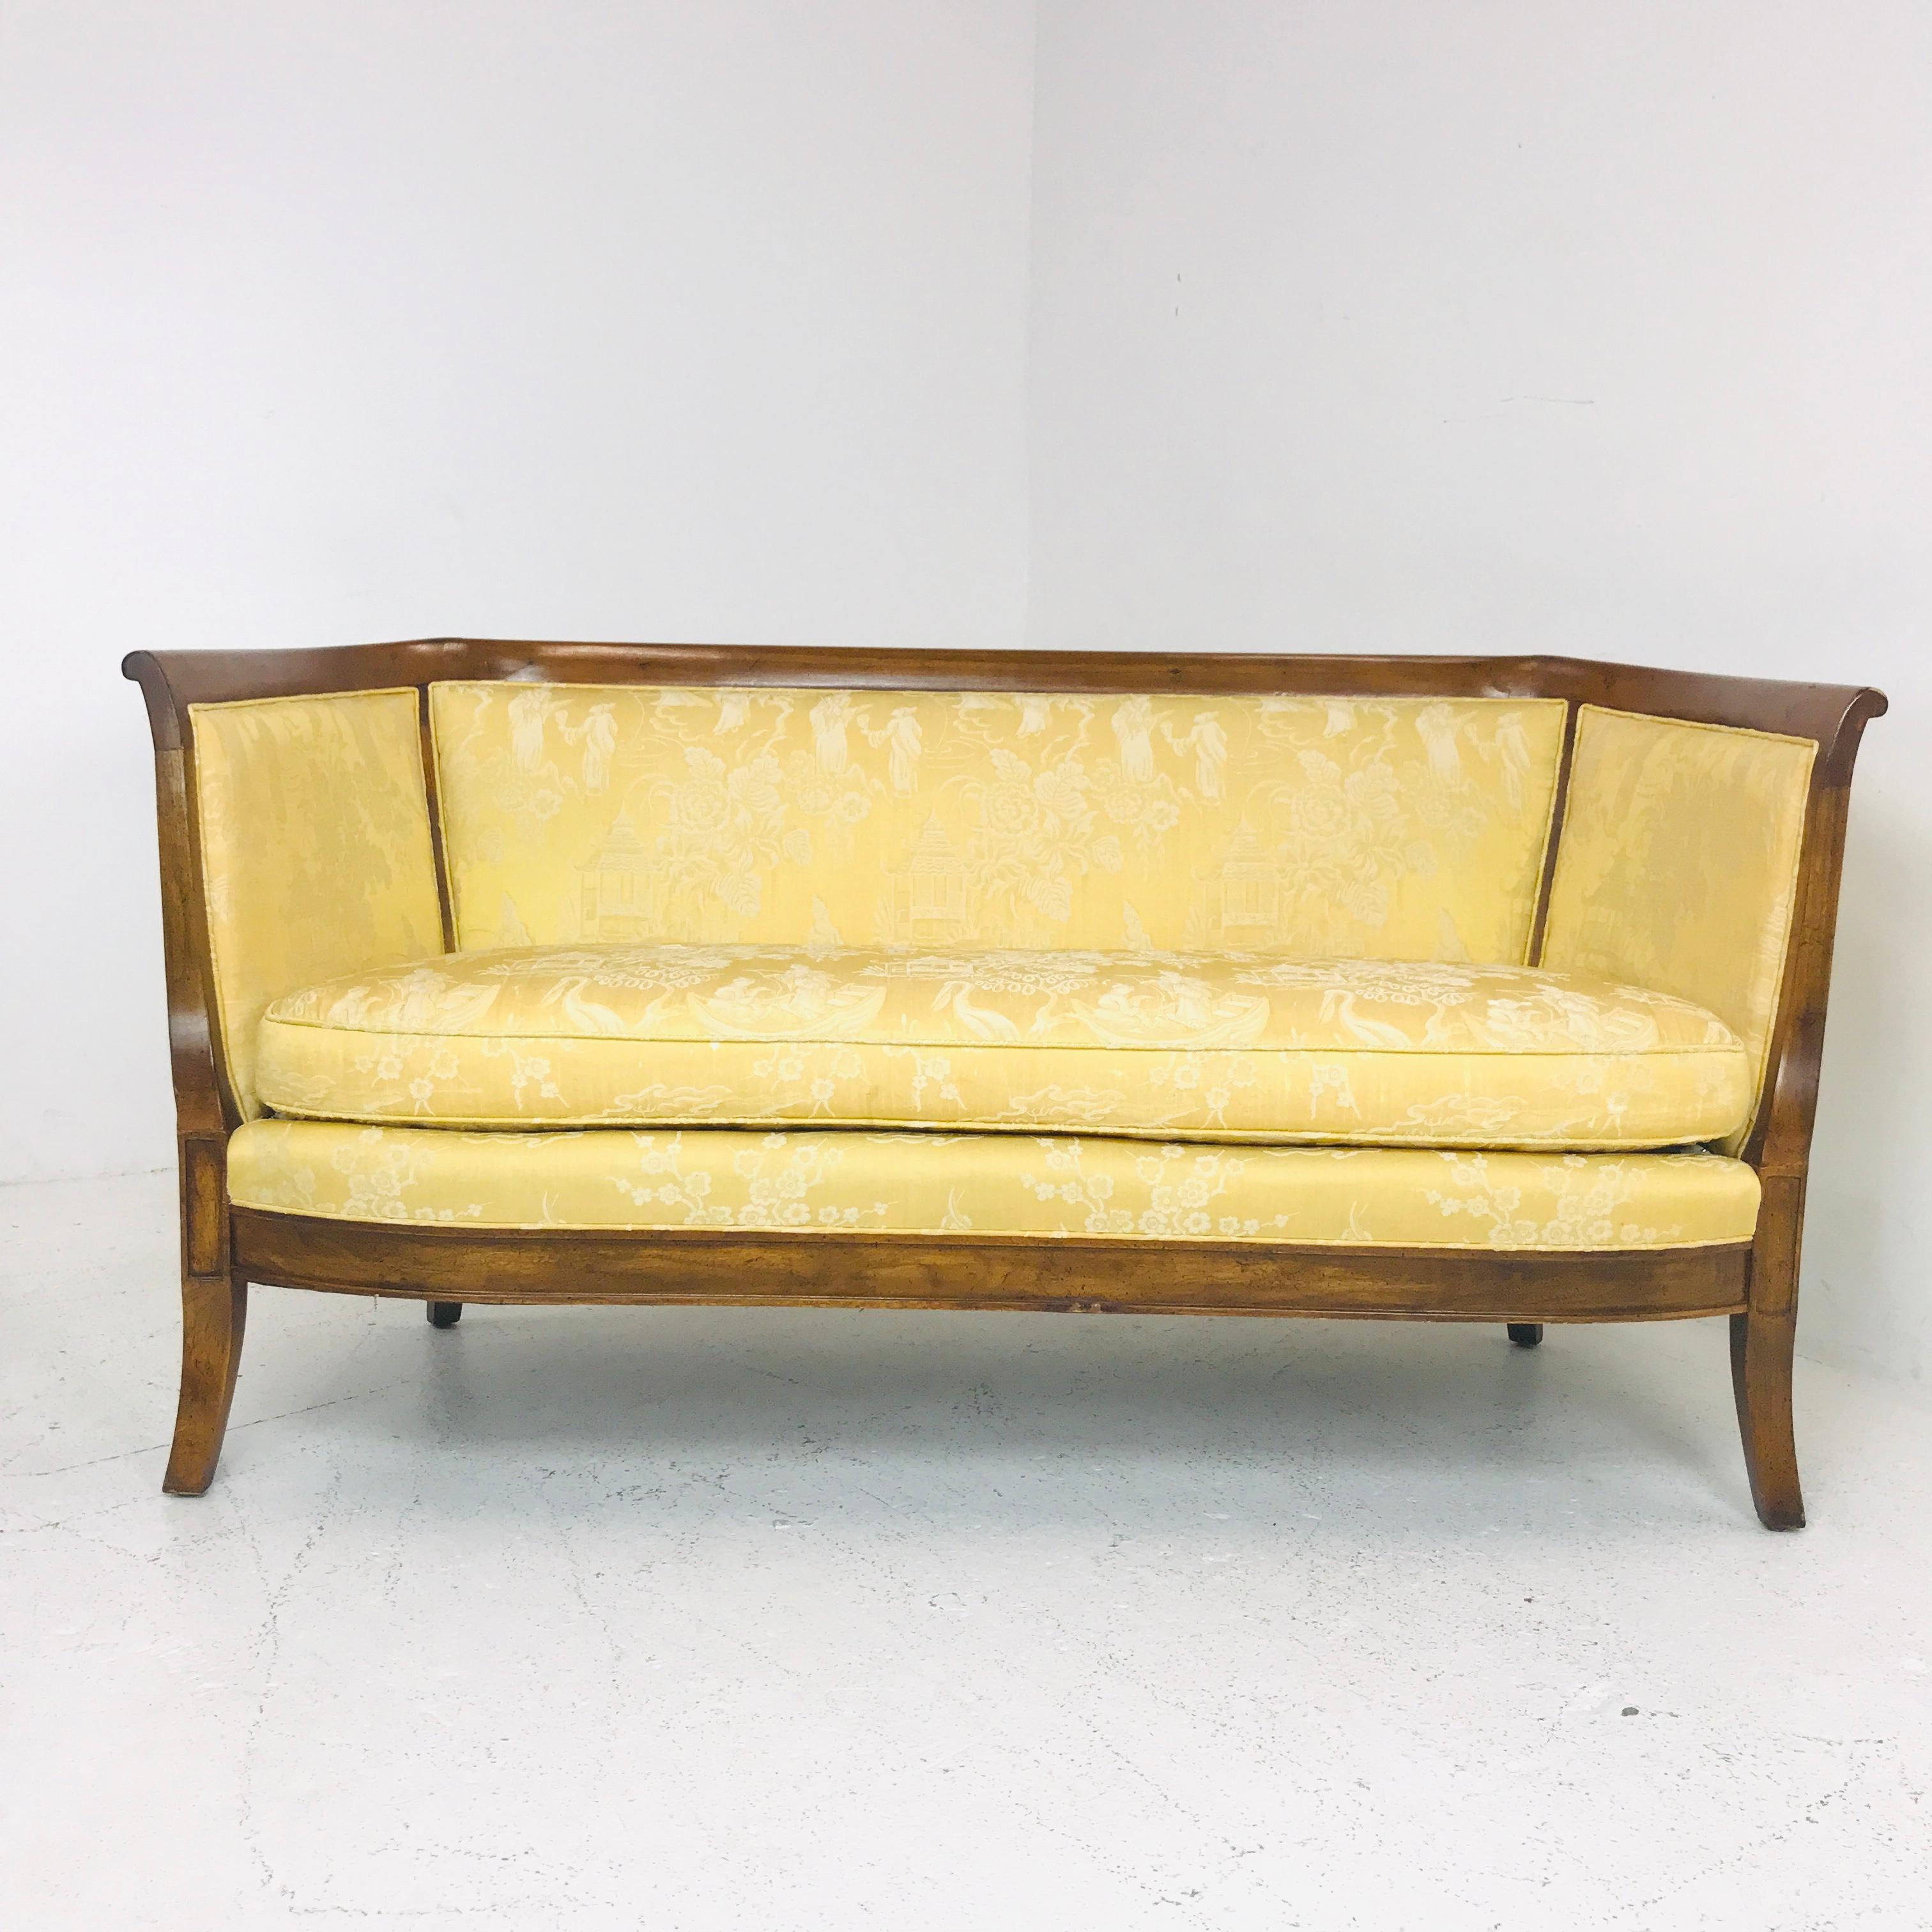 Wood wrapped vintage Bernhardt settee with original upholstery. Upholstery is in good vintage condition and wood surround will need refinishing.

Dimensions:
60 W x 28 D x 30.5 T
seat height 17.